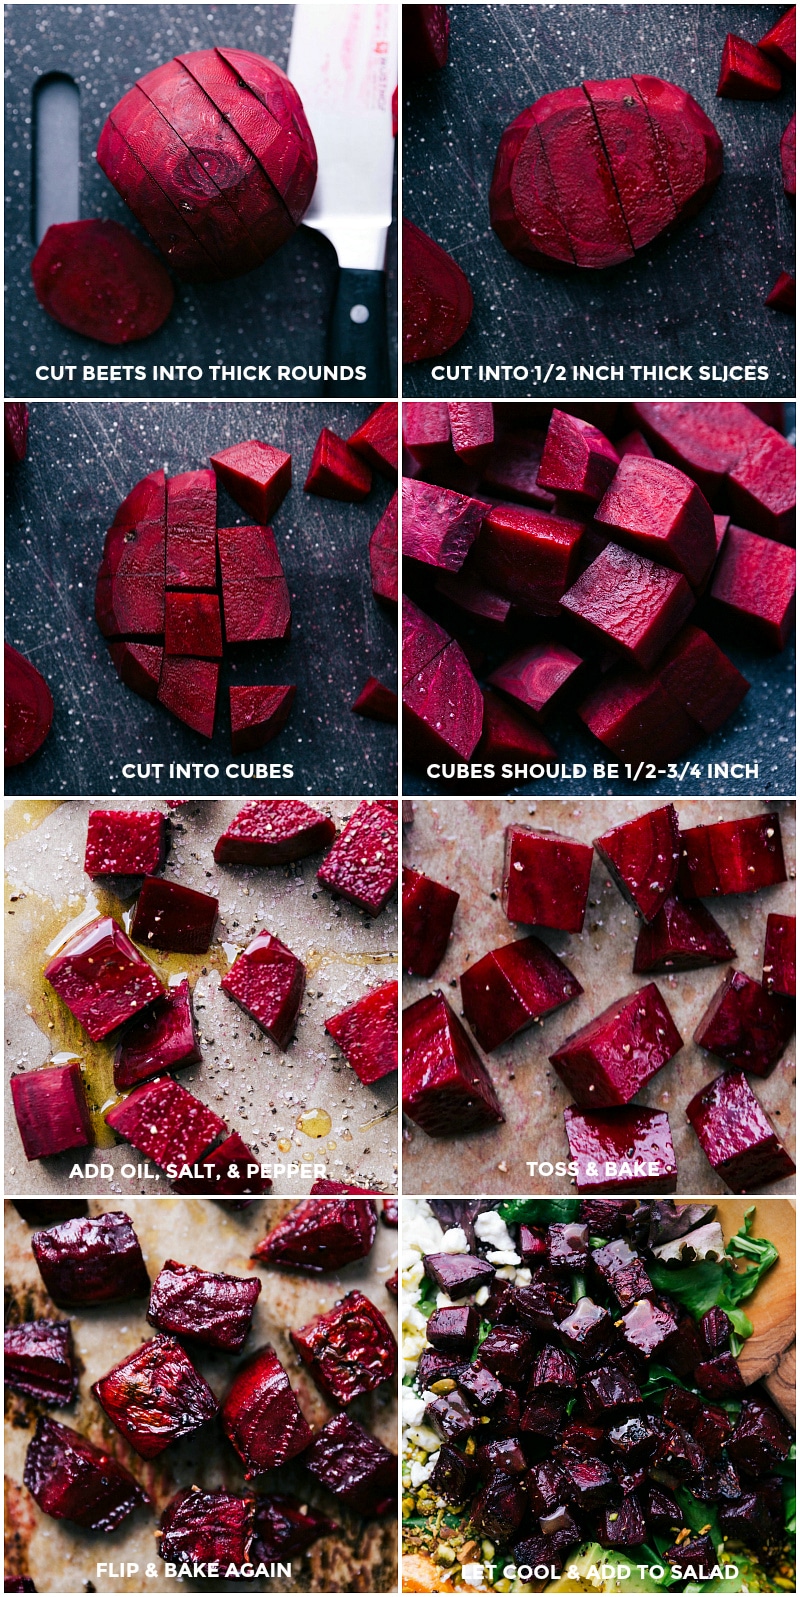 Process shots-- images of the beets in various stages of being cut up and roasted.